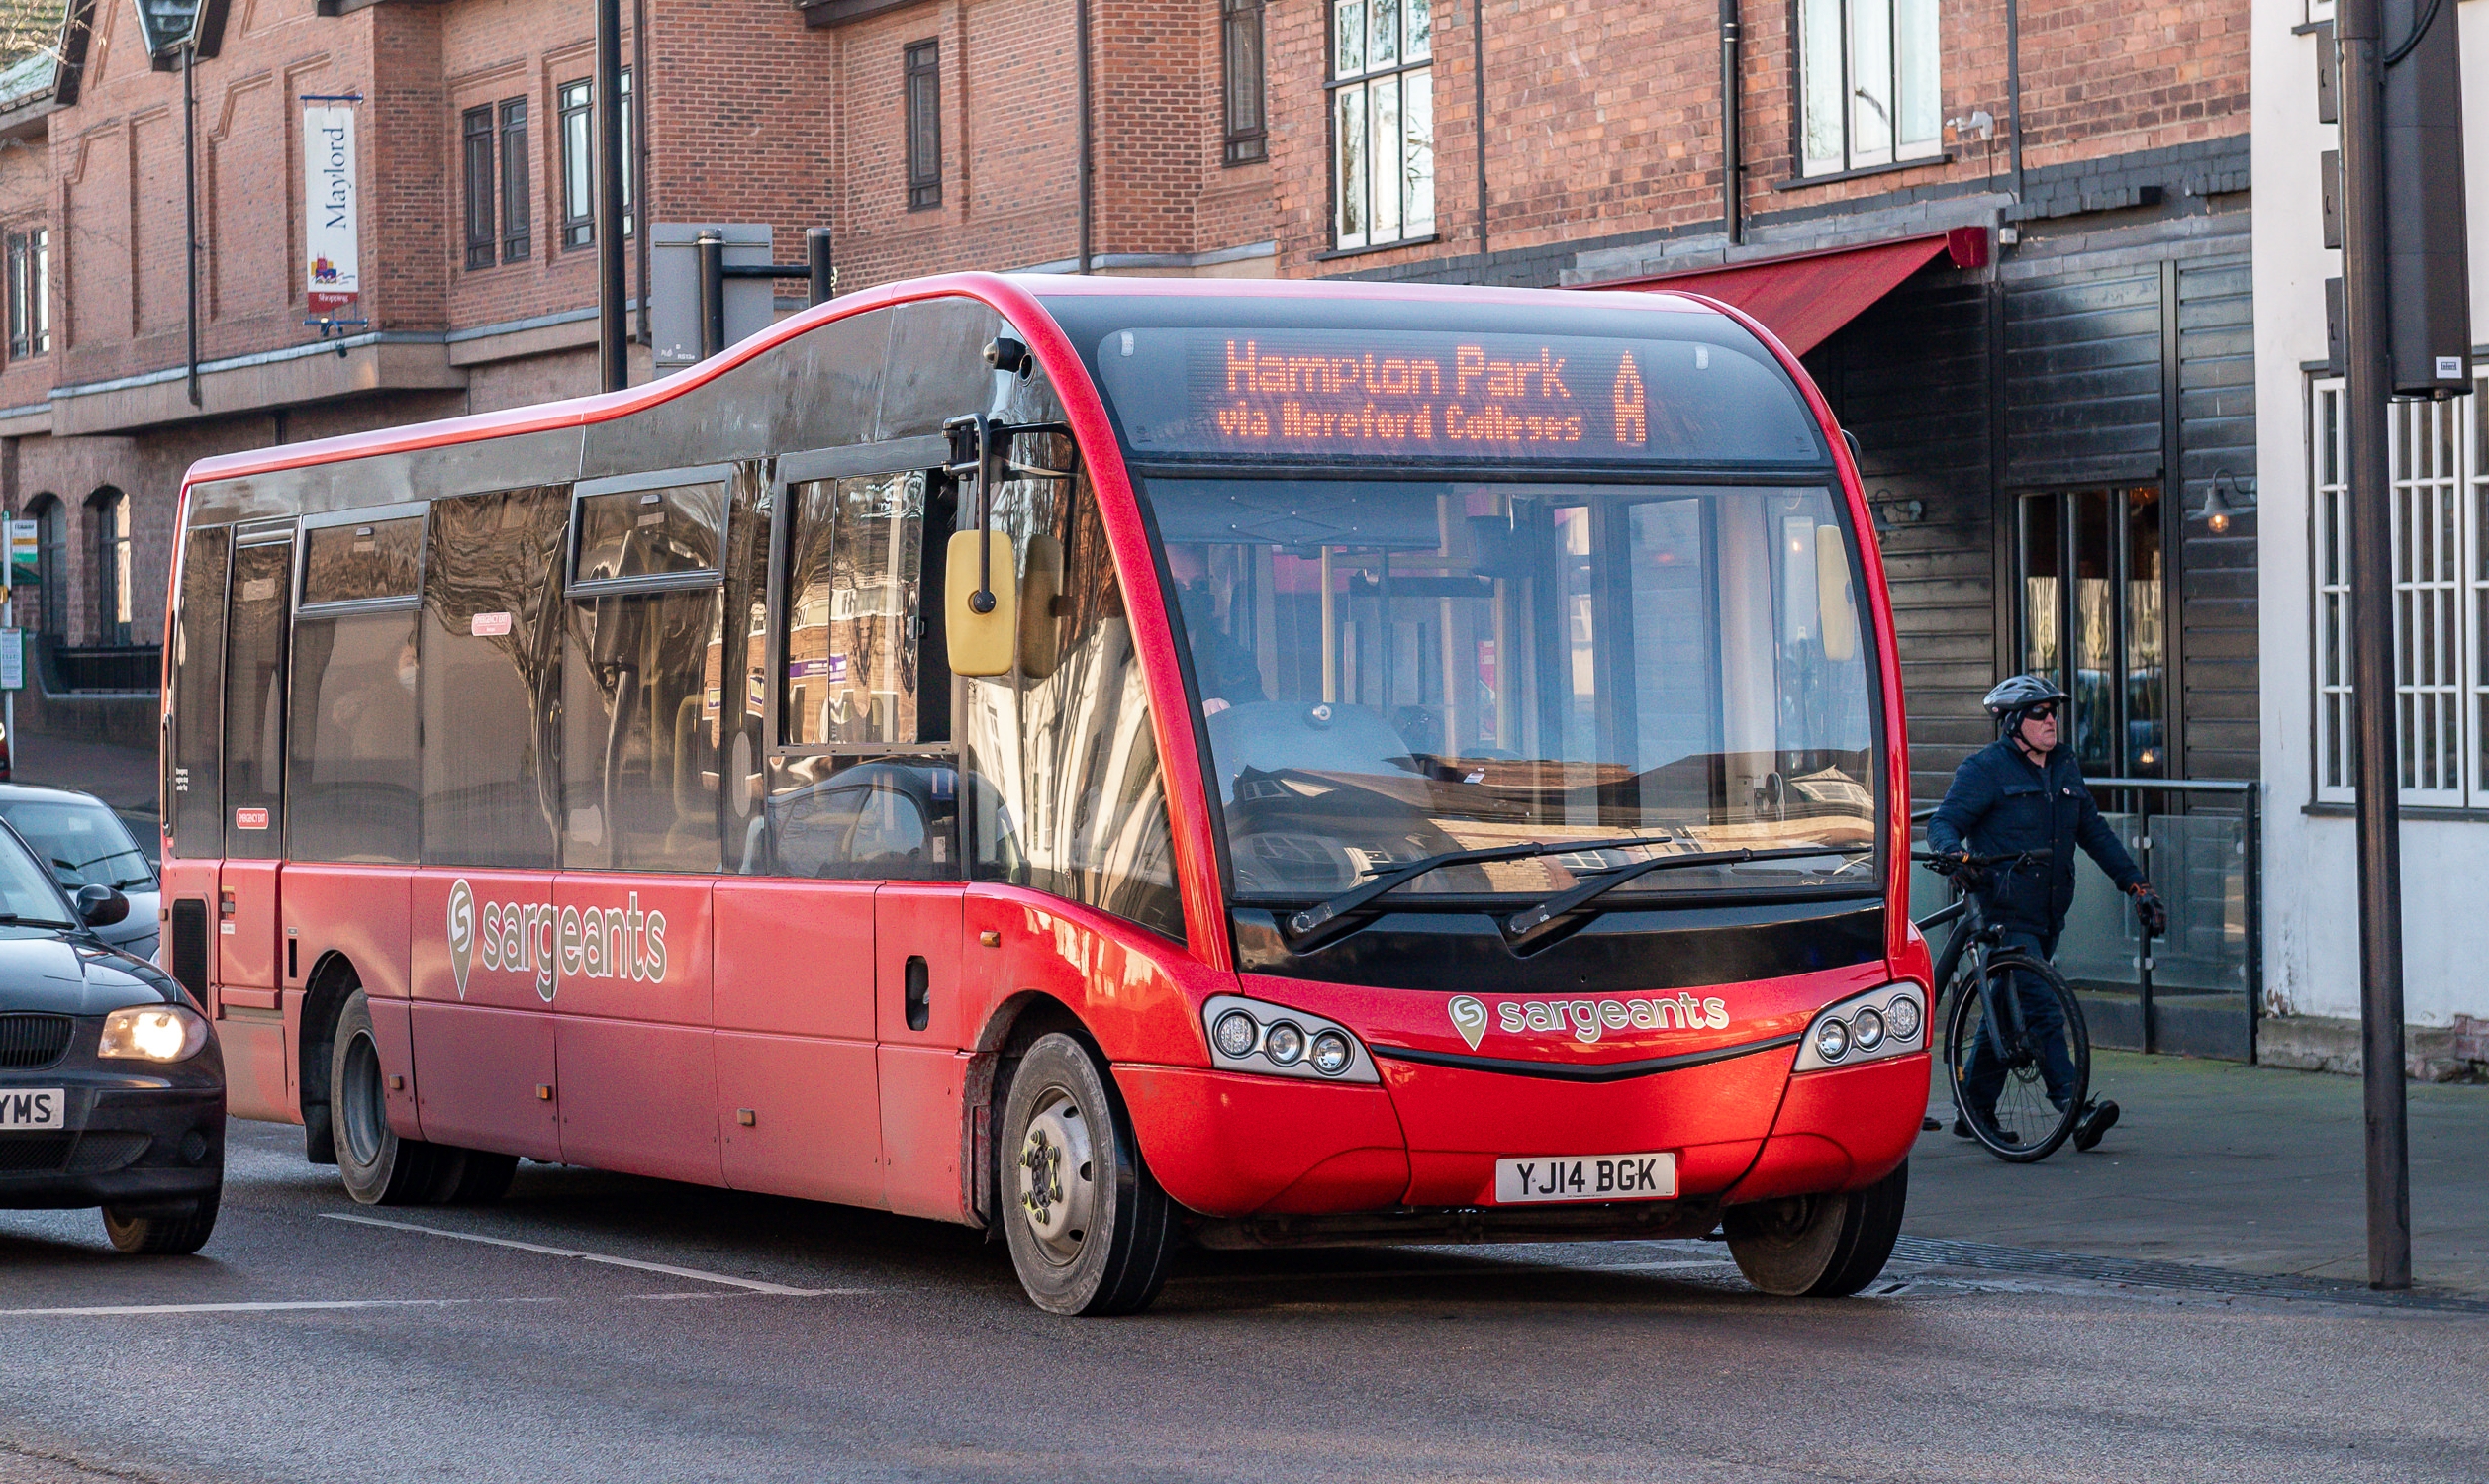 NEWS | Herefordshire’s free weekend bus services set to continue until the end of August but costs are increasing